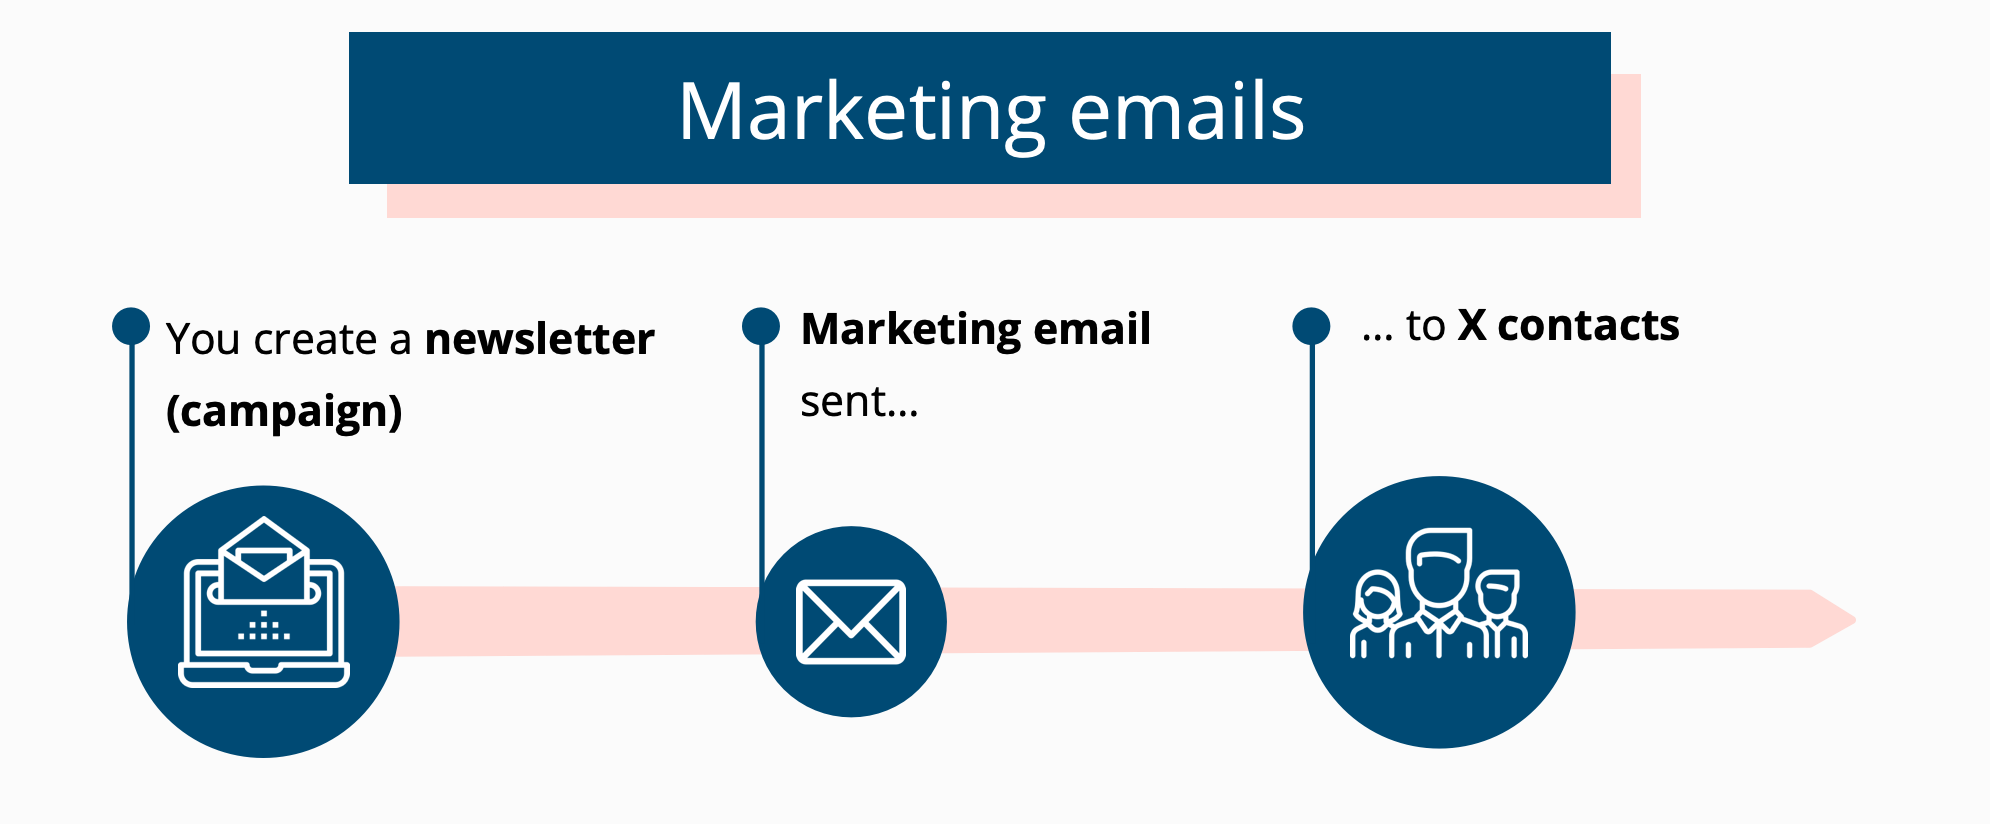 Marketing_emails_explained.png